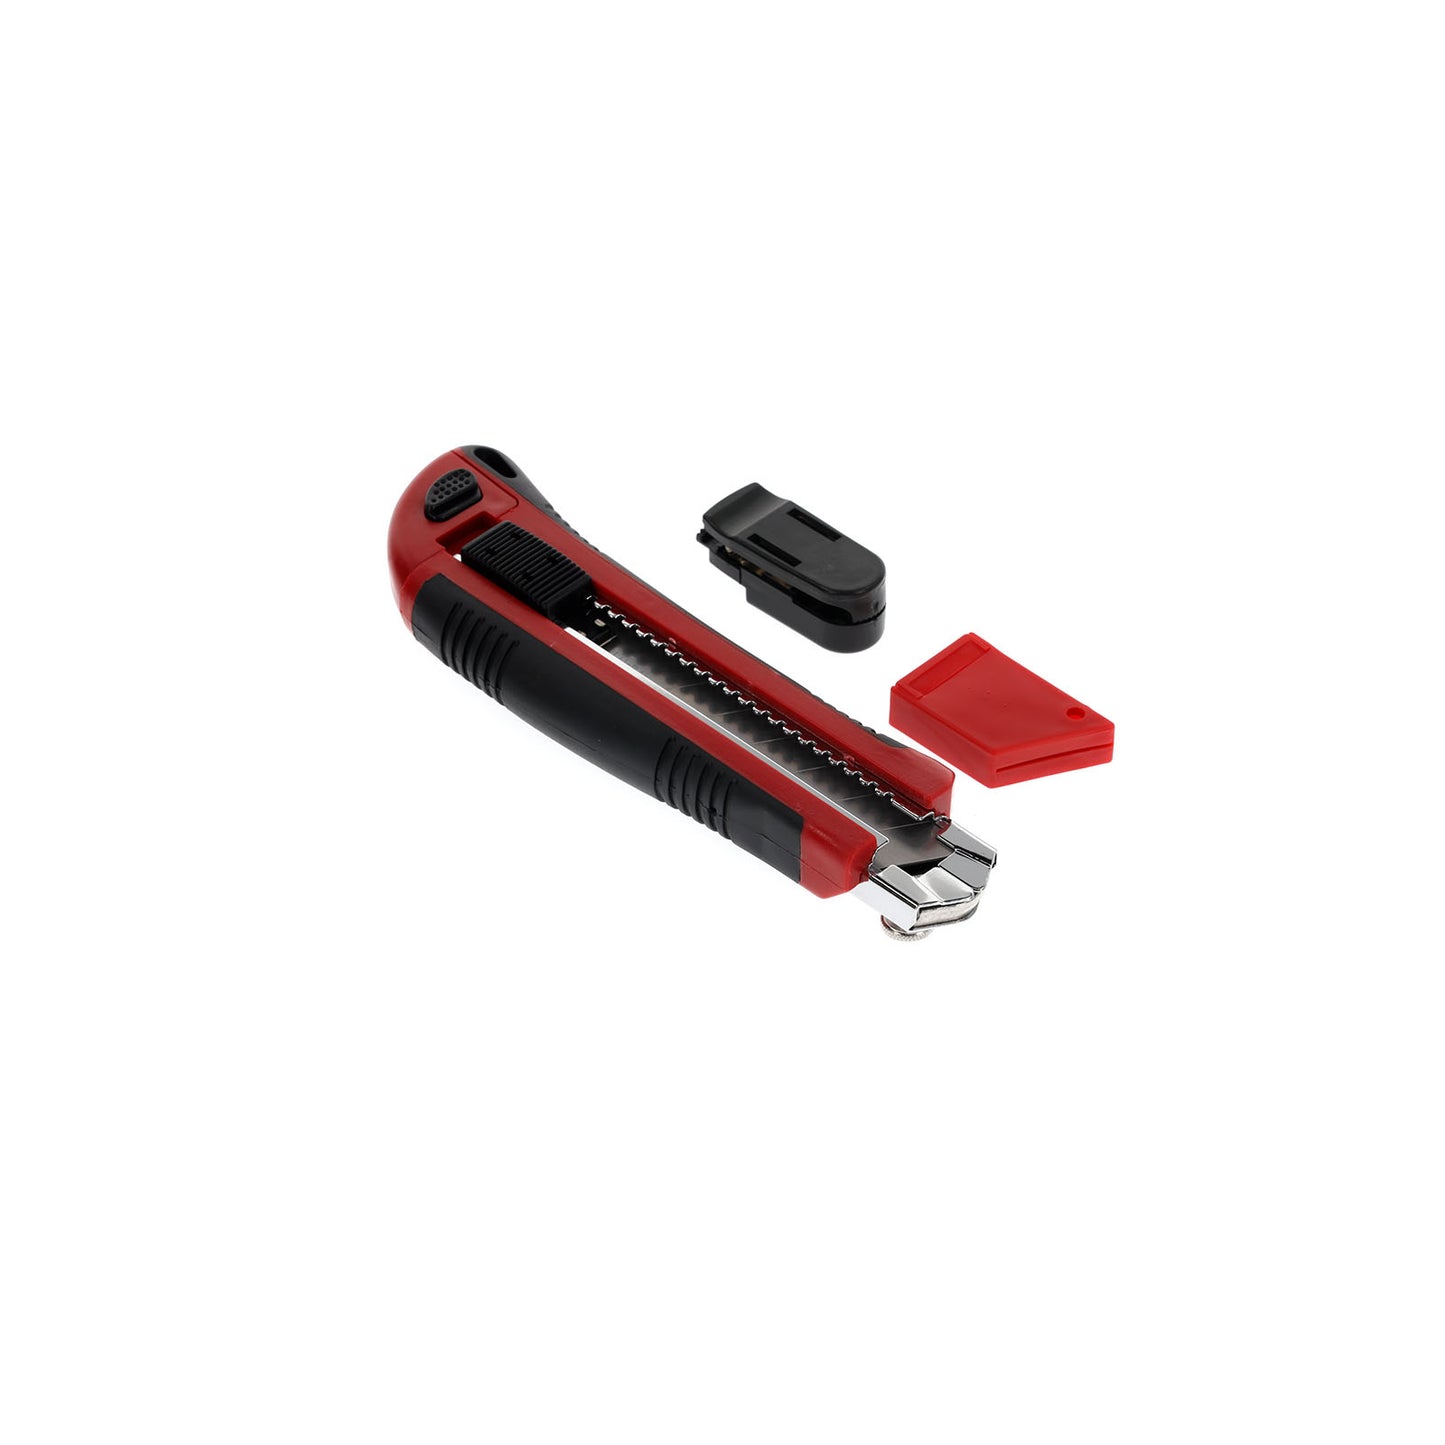 GEDORE red R93200025 - Cutter knife with 5 blades, 25 mm wide, with clip (3301605)